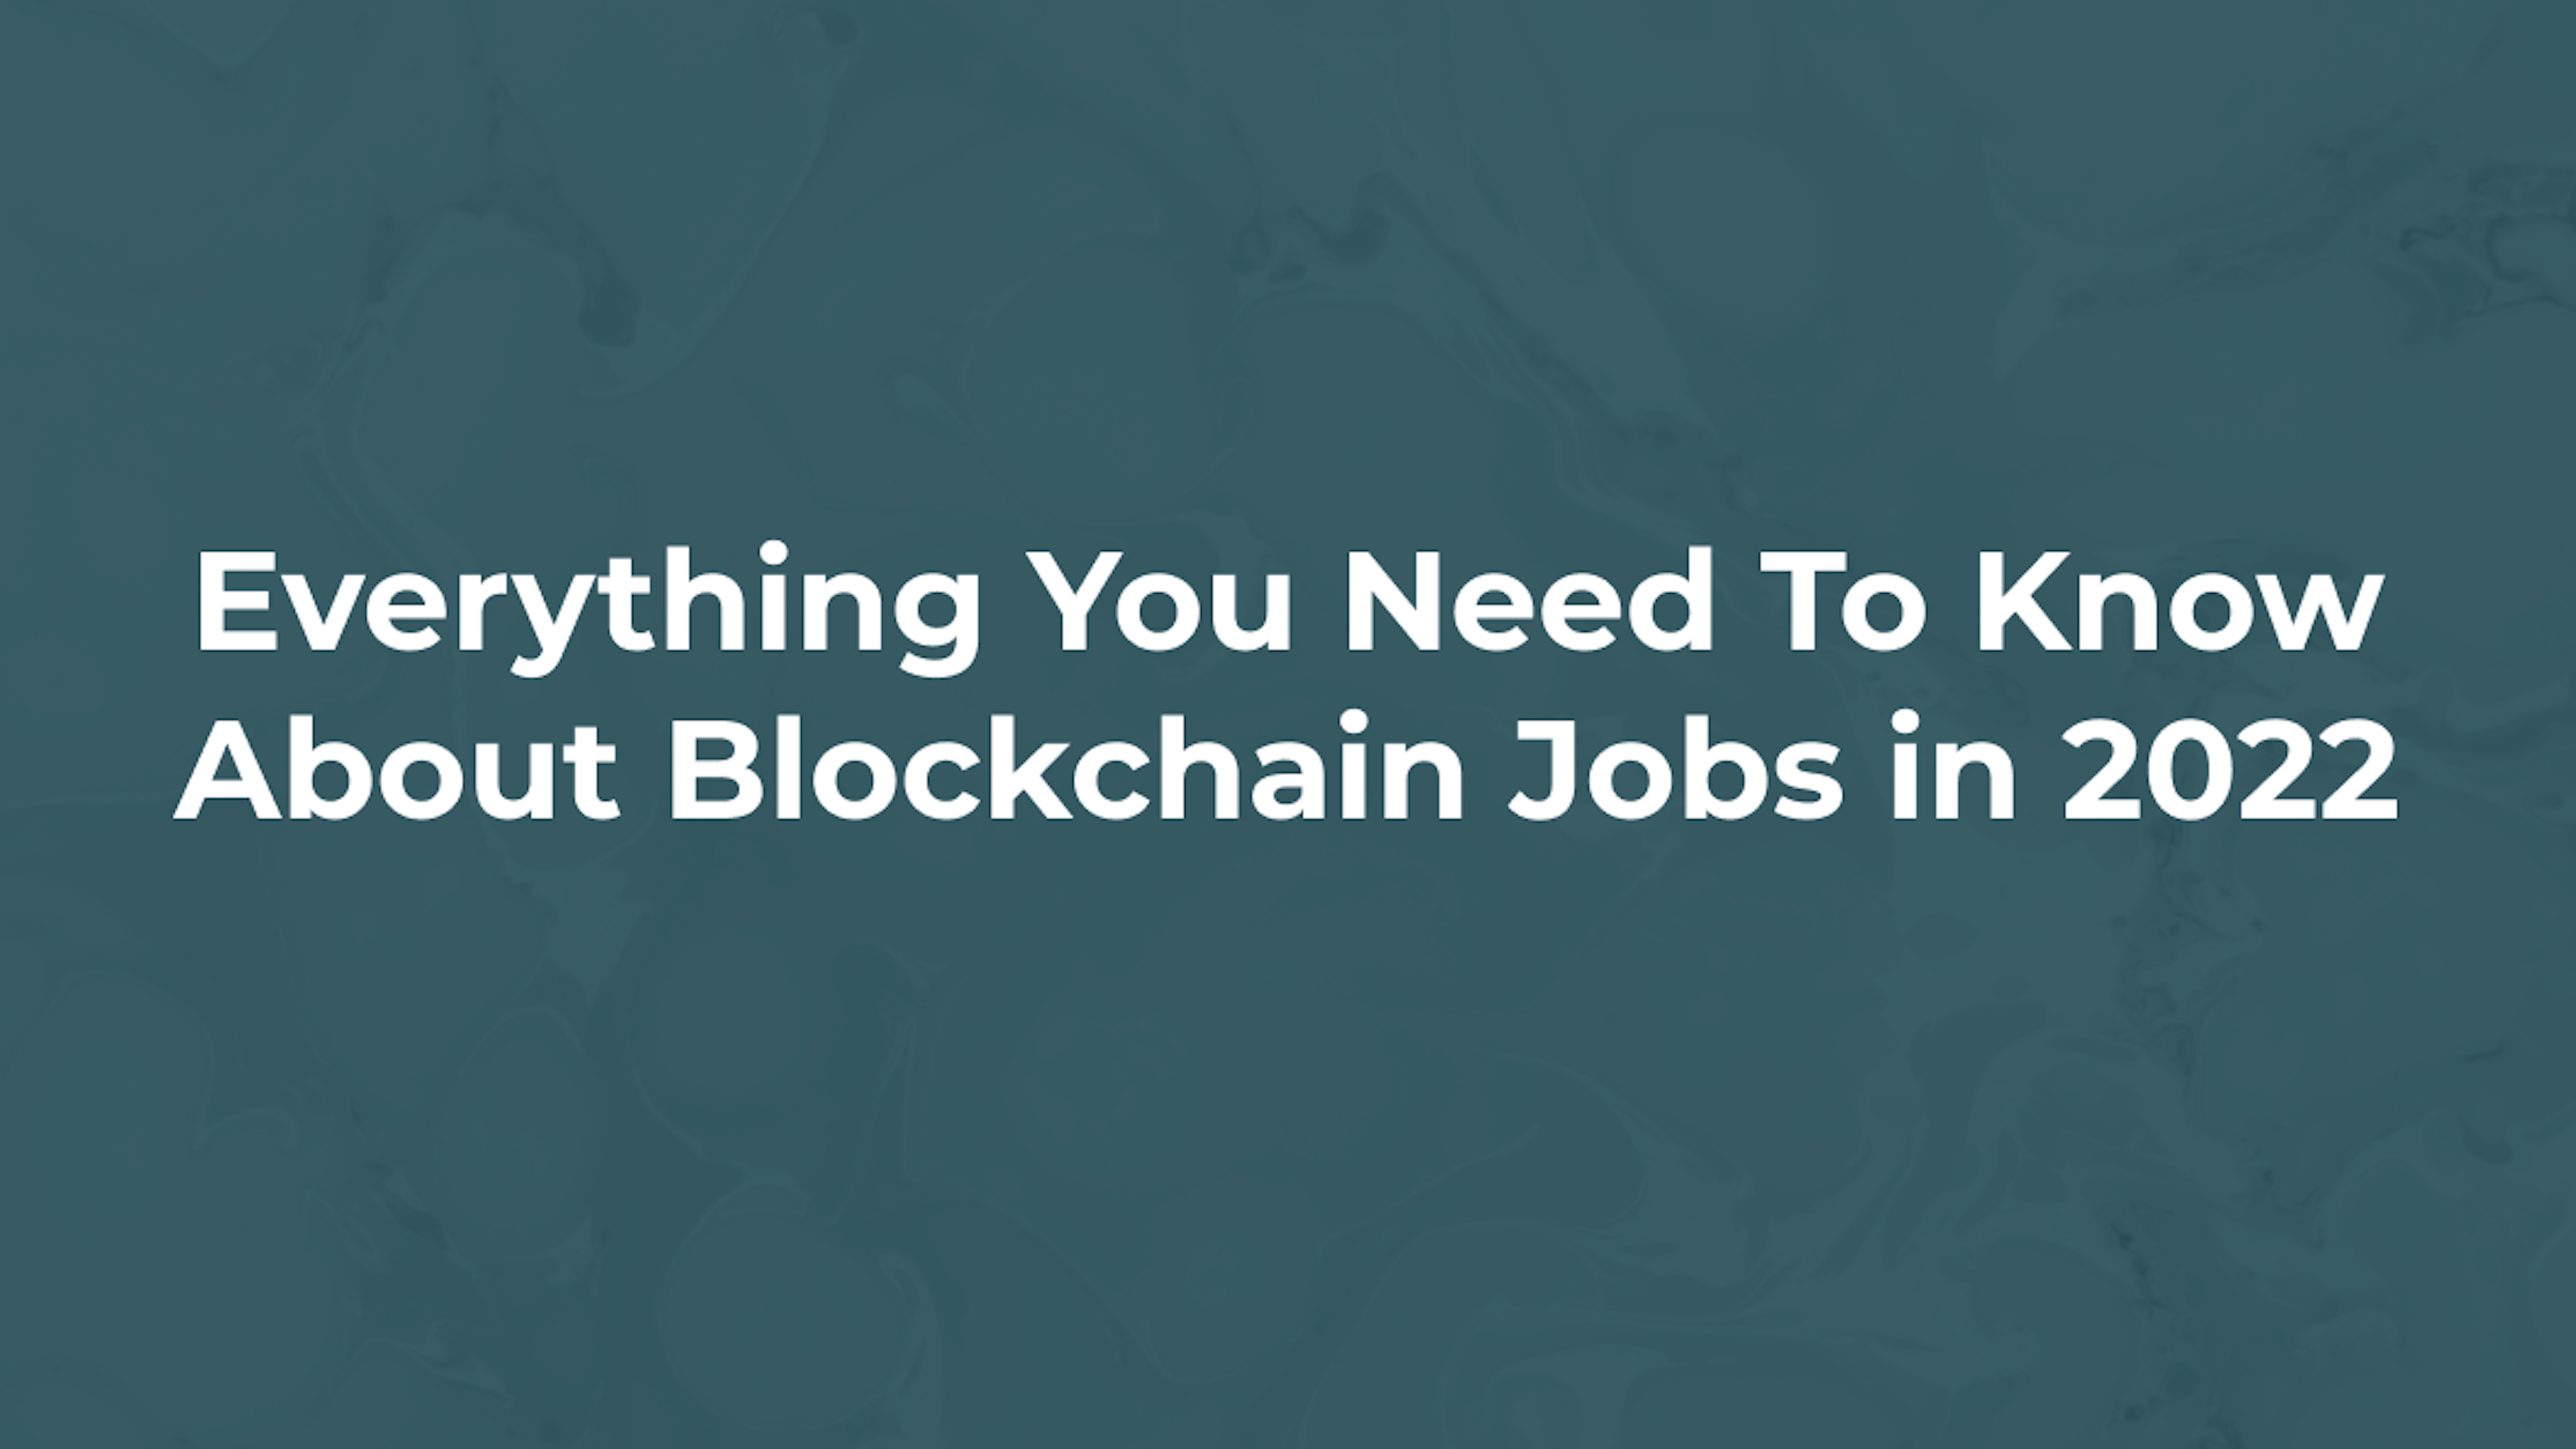 Everything You Need To Know About Blockchain Jobs in 2022 | Blockchain Works